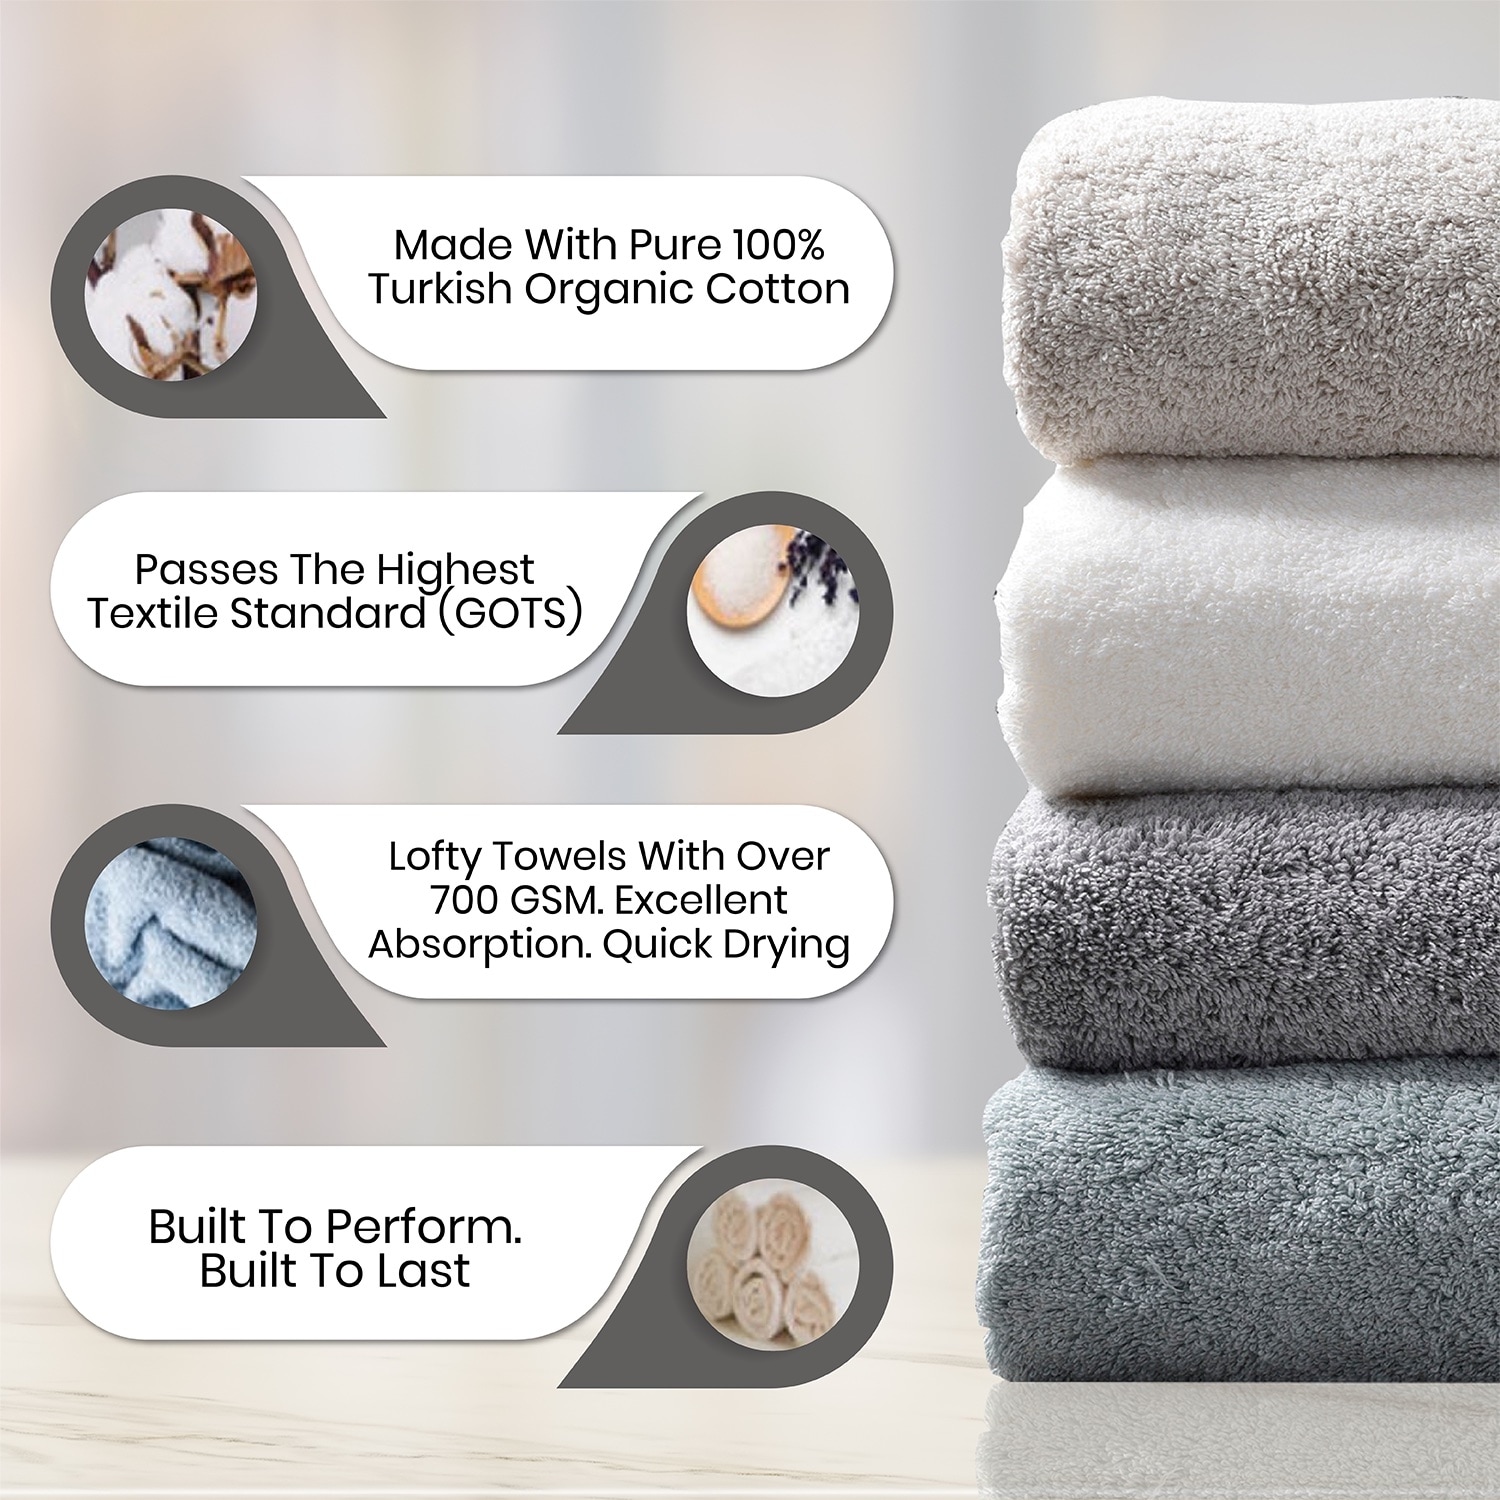 https://ak1.ostkcdn.com/images/products/is/images/direct/7461c6c285431bac0bfba0cada0ea4536e7af40b/Delilah-Home-Organic-Cotton-Towels-3-piece-set-13x13-16x30-30x54-White.jpg